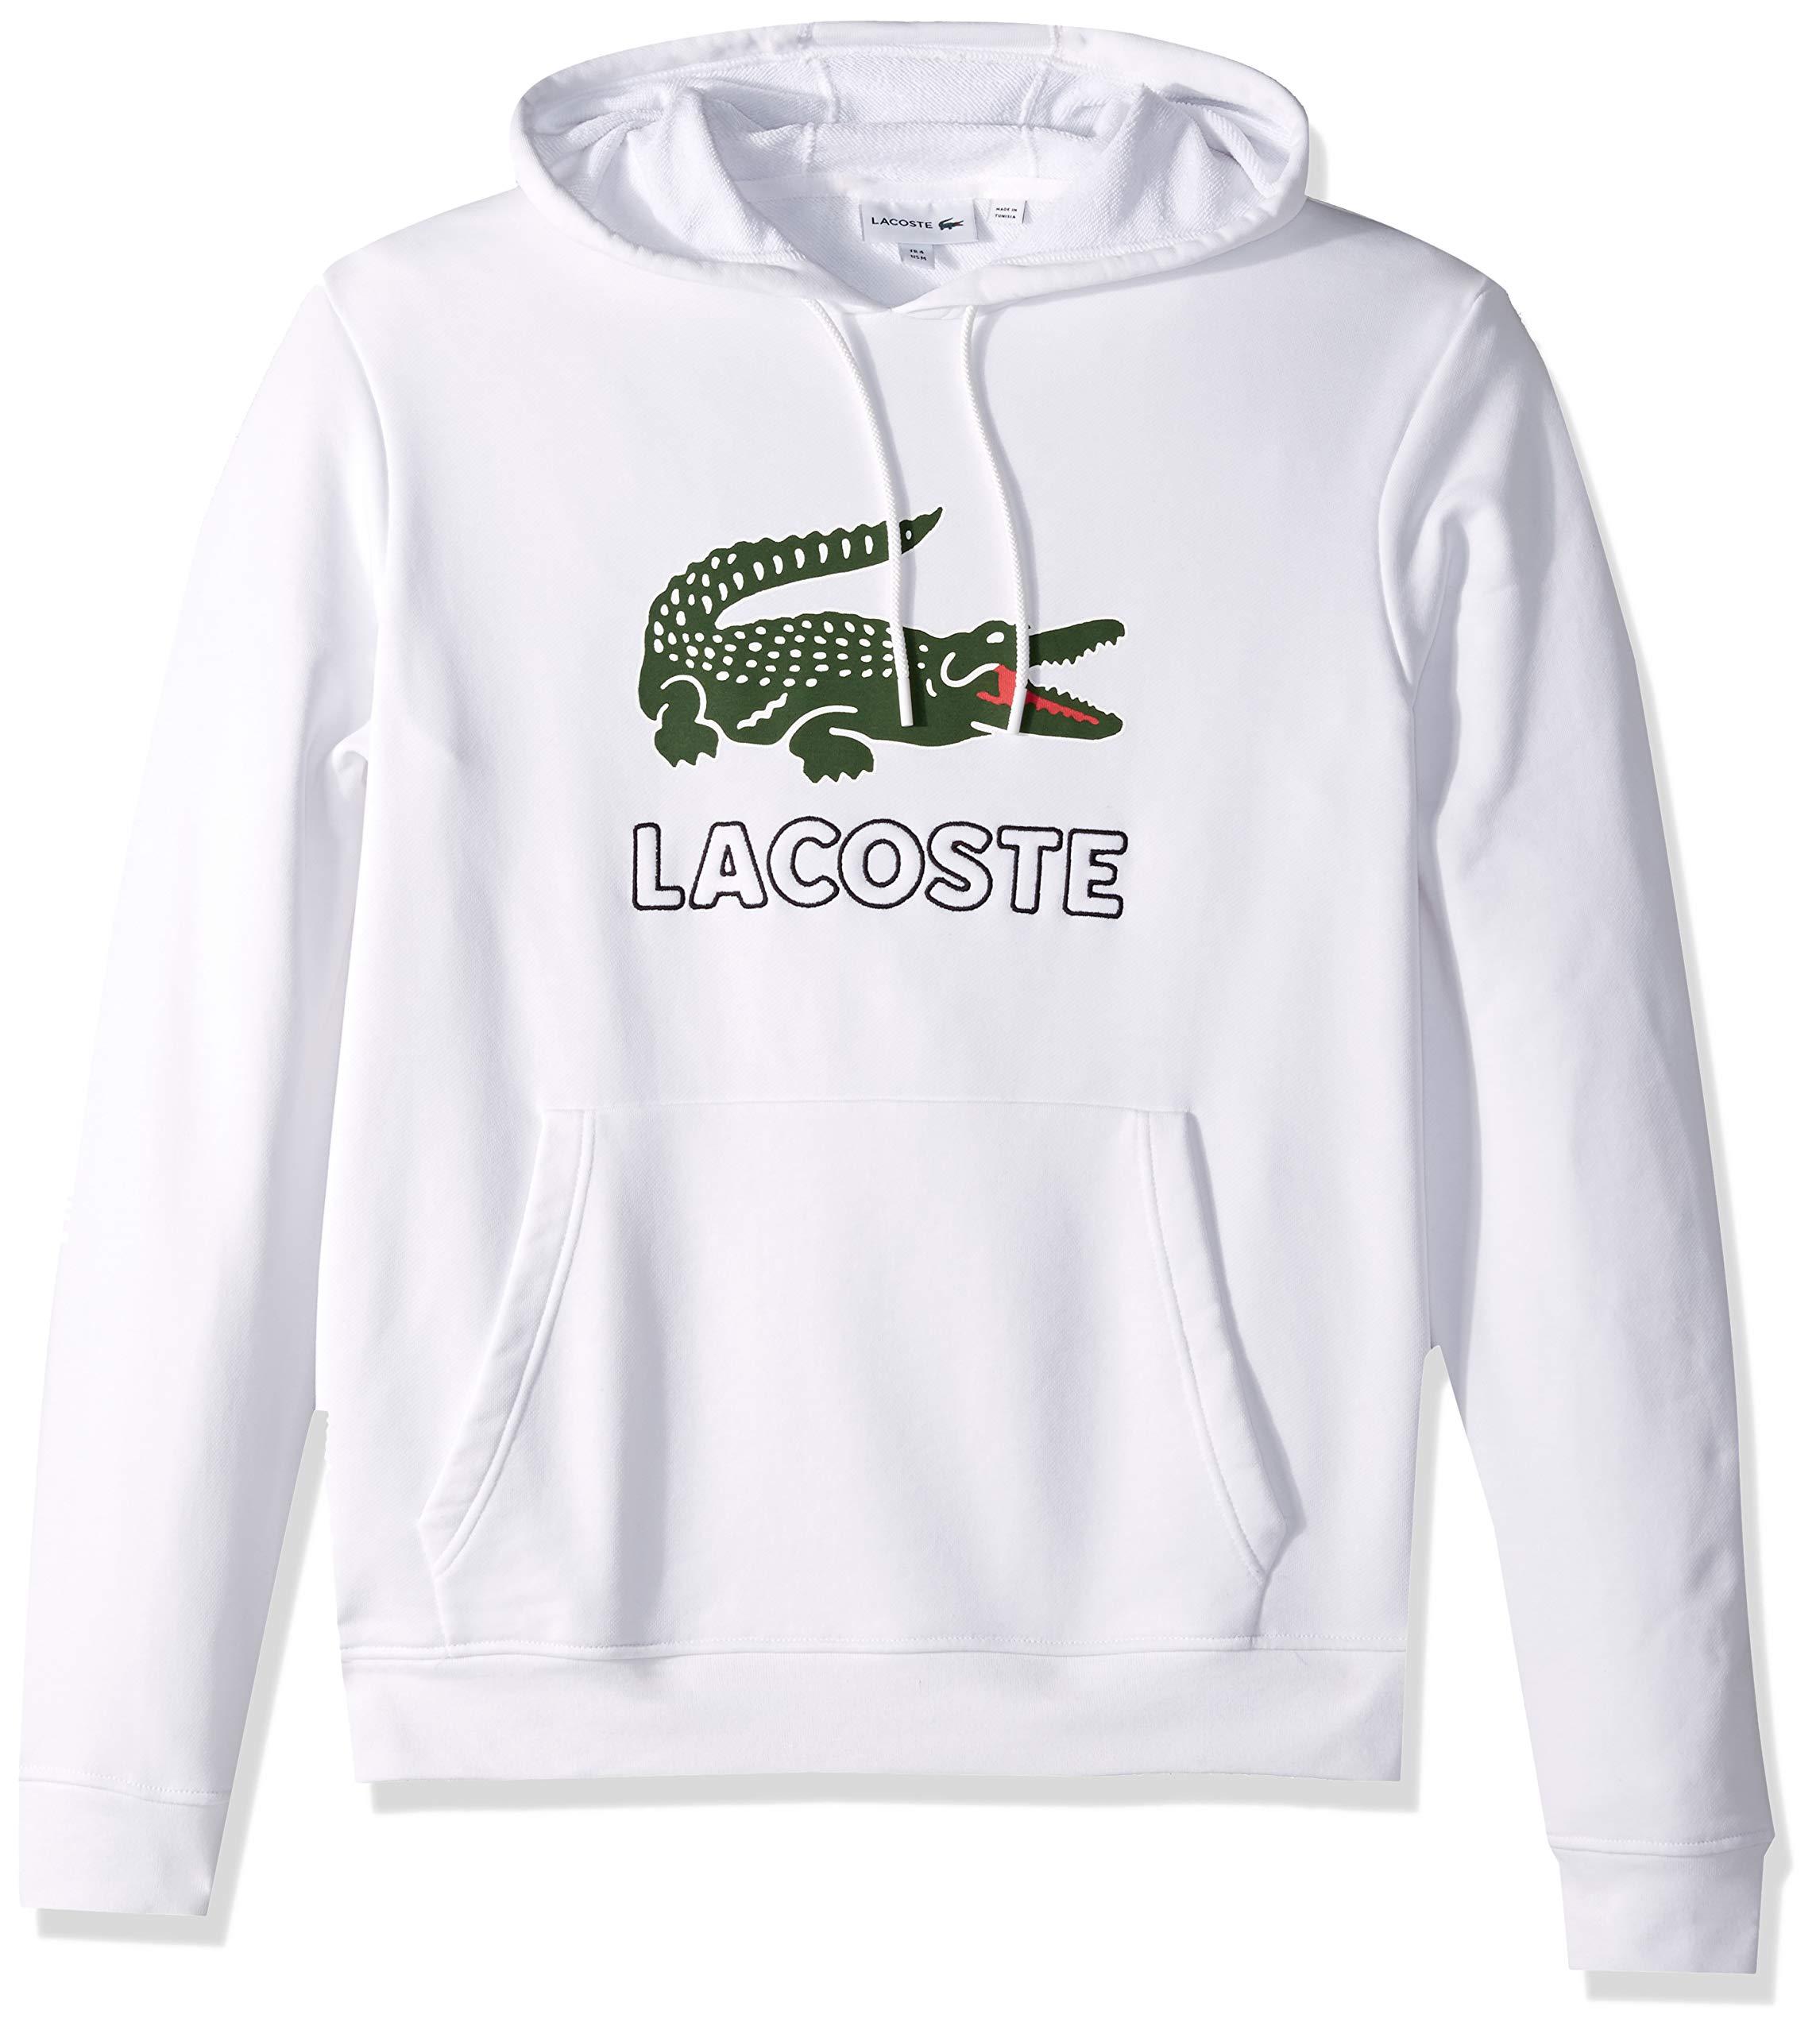 lacoste white hoodie